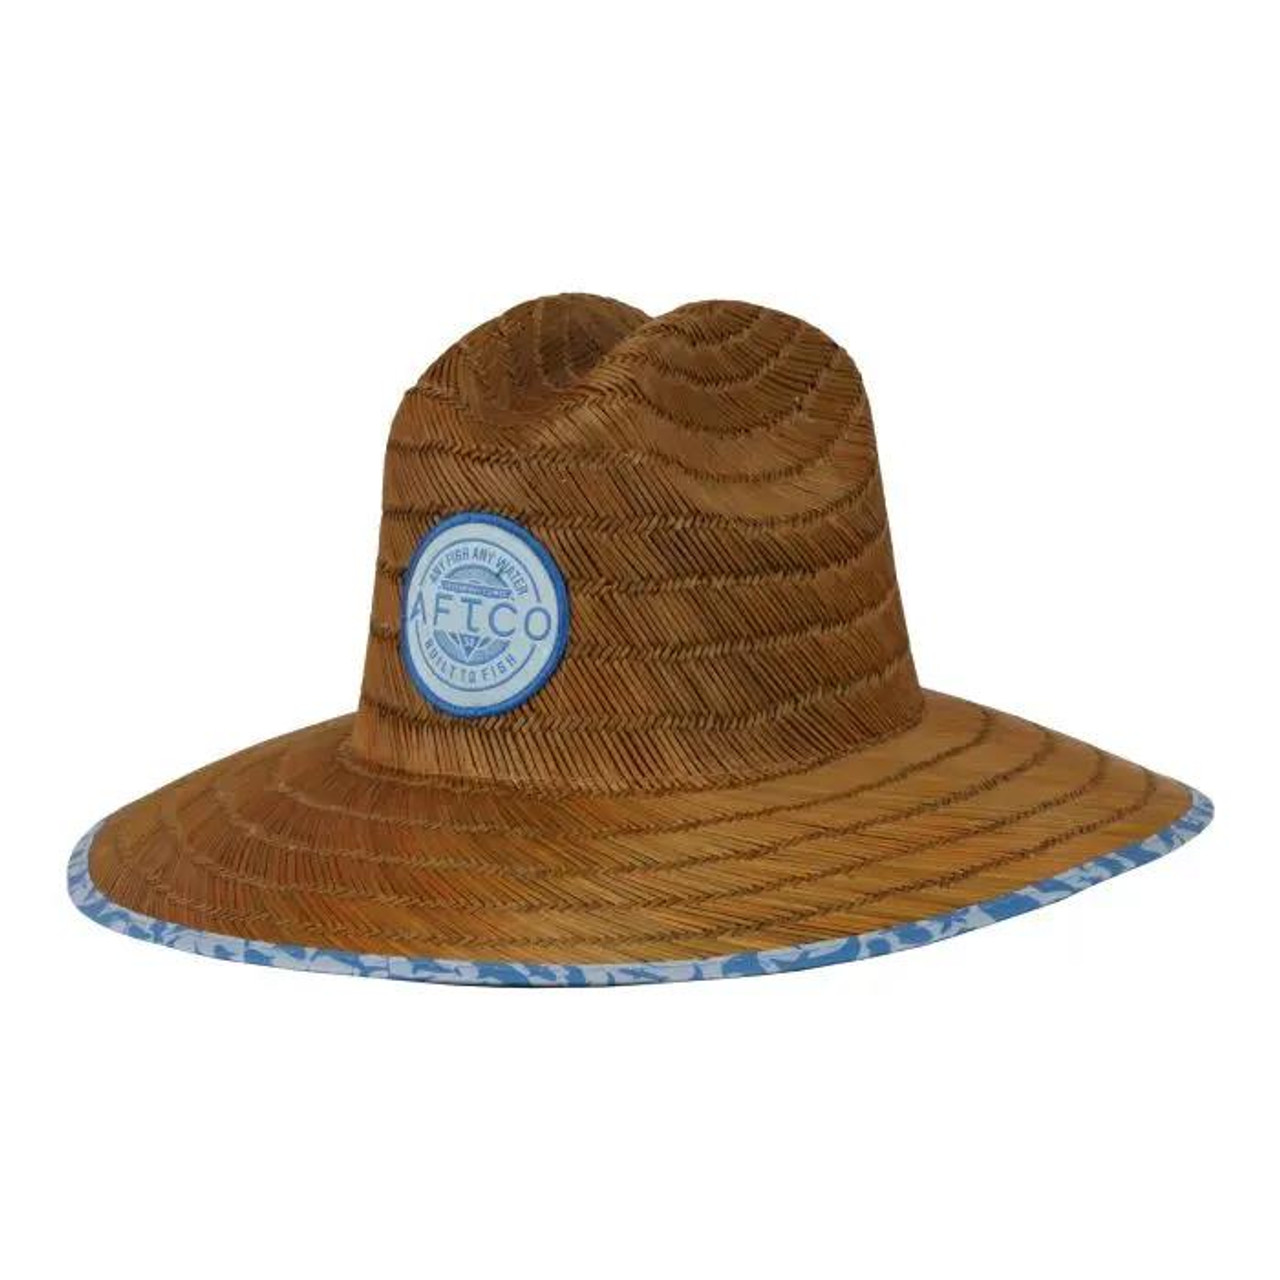 https://cdn11.bigcommerce.com/s-0xmhwue6/images/stencil/1280x1280/products/24659/57712/AFTCO-Youth-Illuminated-Straw-Hat-Slate-Blue-054683798648_image1__28678.1676388362.jpg?c=2